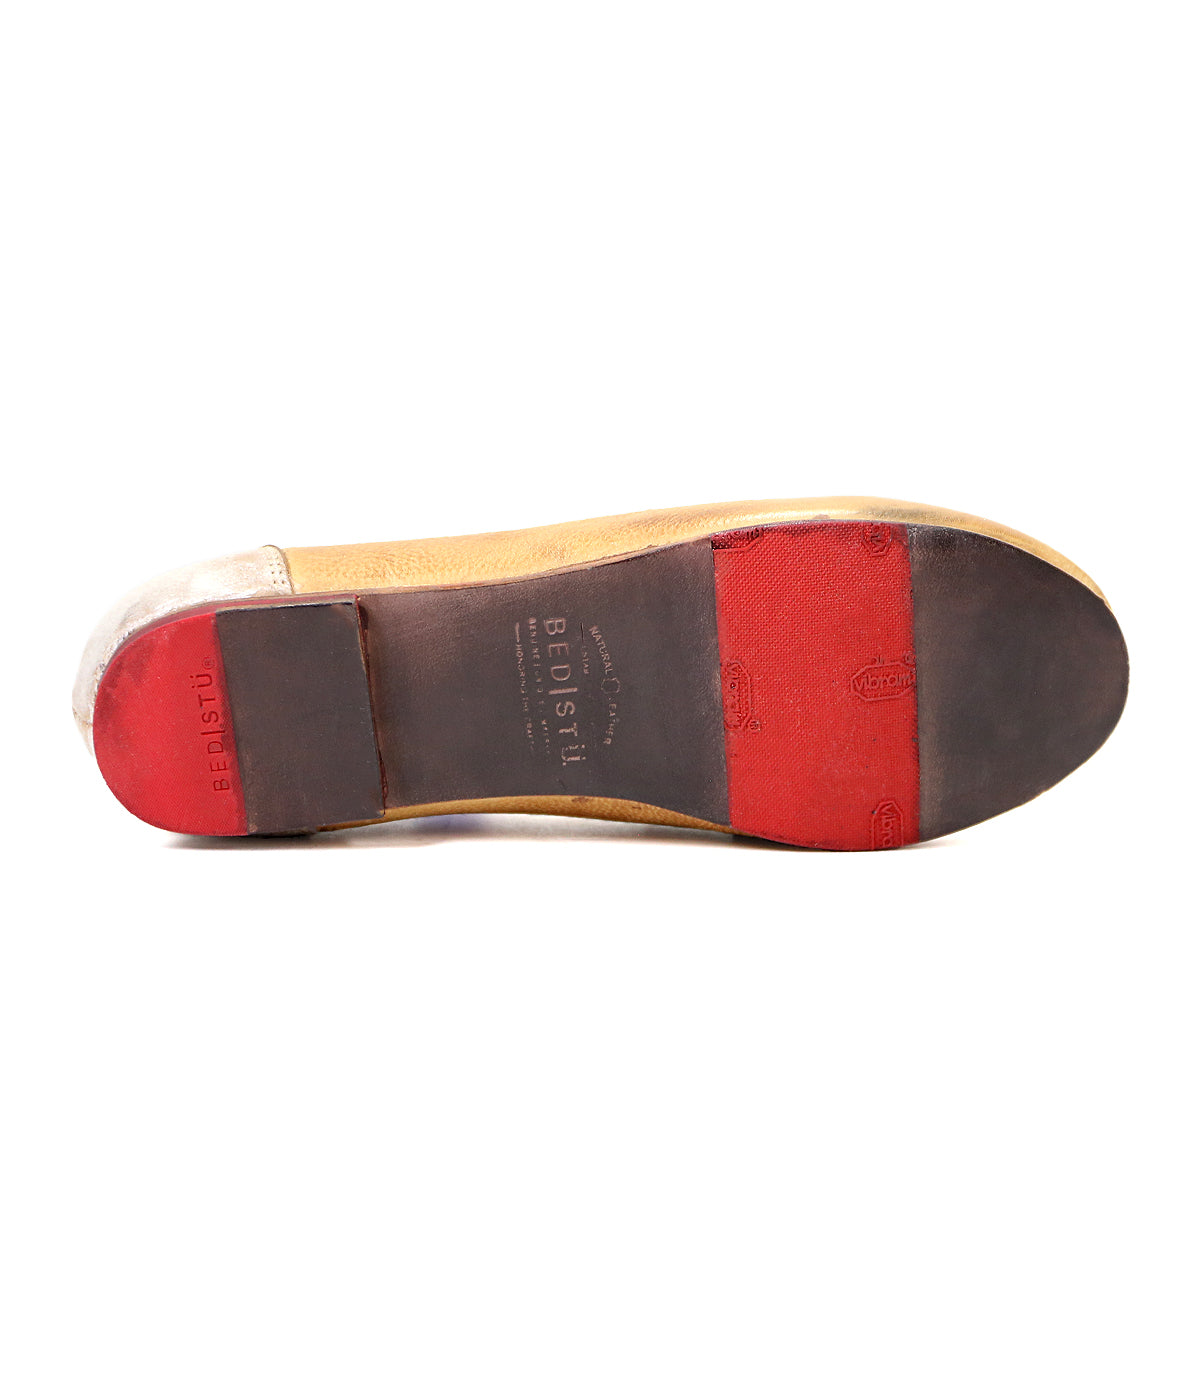 Sole of a Bed Stu red and black two-tone leather ballet shoe displaying visible brand markings and a size written in gold lettering, isolated on a white background.